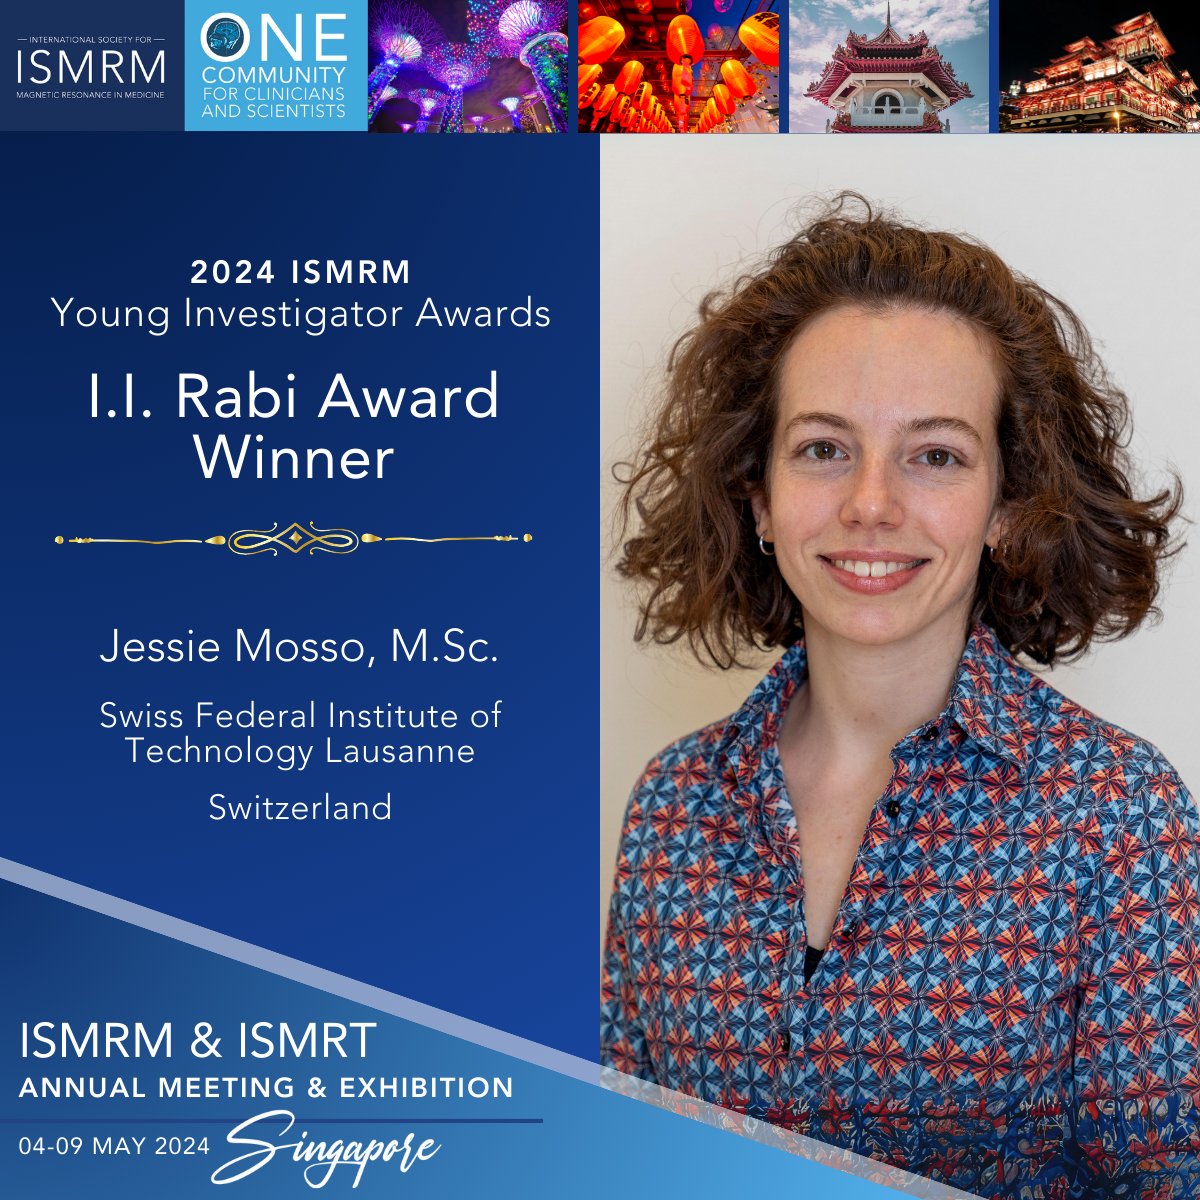 Congratulations to the 2024 I.I. Rabi Award Winner, Jessie Mosso from the Swiss Federal Institute of Technology Lausanne! 2024 ISMRM Young Investigator Awards: ow.ly/sSJI50RA109 #ISMRM2024 #ISMRT2024 #ISMRM #ISMRT #MRI #MR #MagneticResonance #Singapore #EPFL